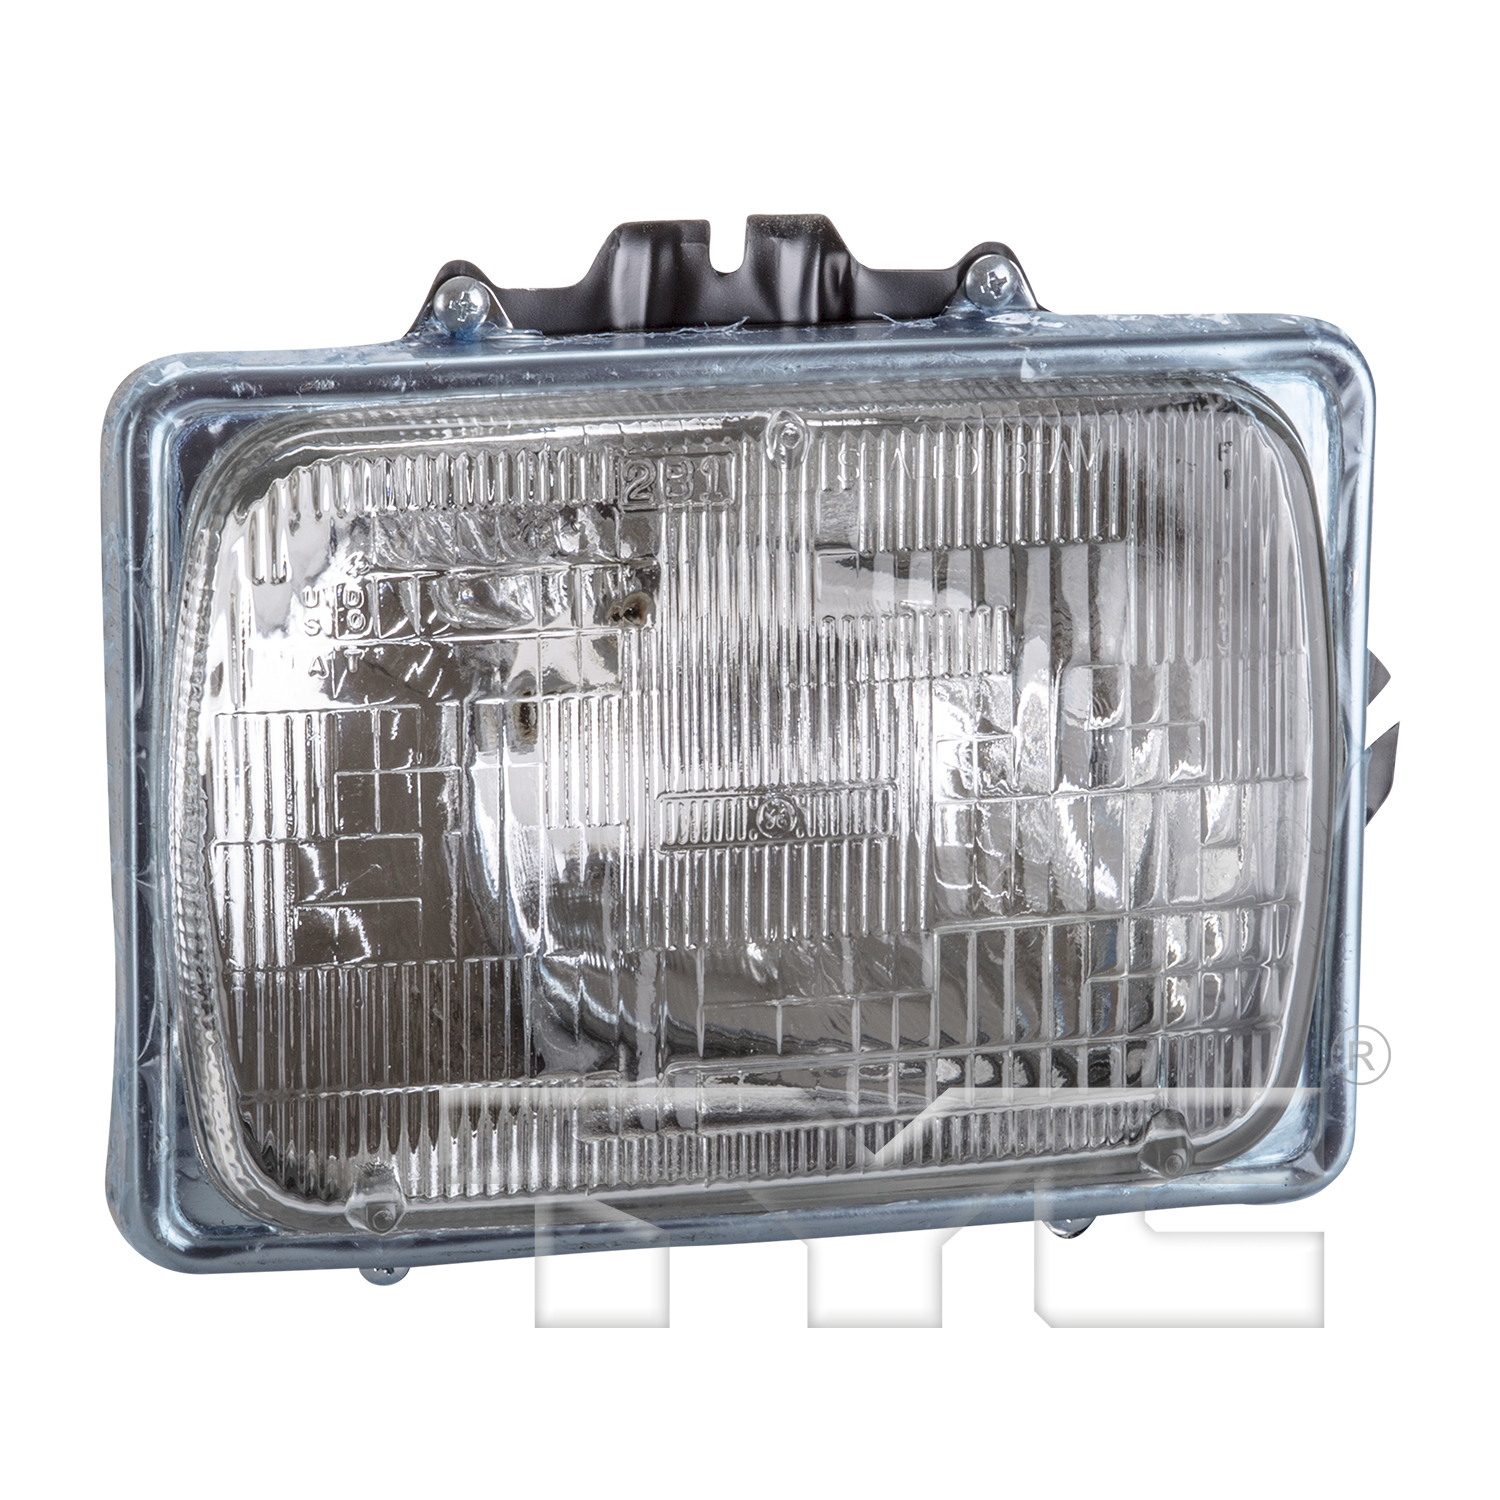 Aftermarket HEADLIGHTS for FORD - E-550 ECONOLINE SUPER DUTY, E-550 ECONOLINE SUPER DUTY,02-02,RT Headlamp assy sealed beam